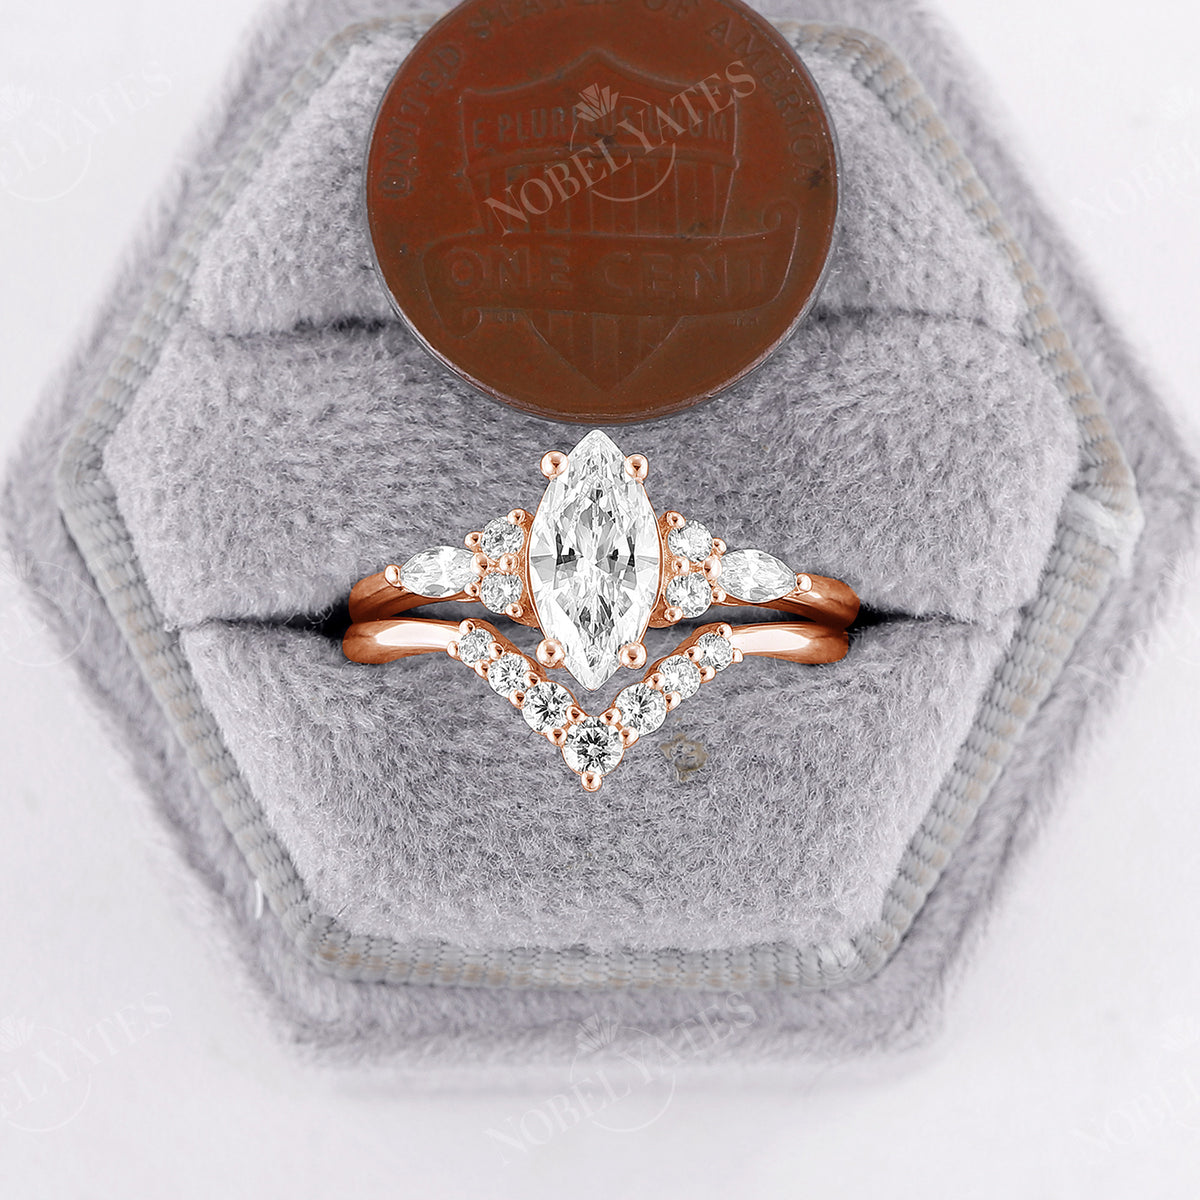 Marquise Moissanite Cluster Side Stones Engagement Ring Set